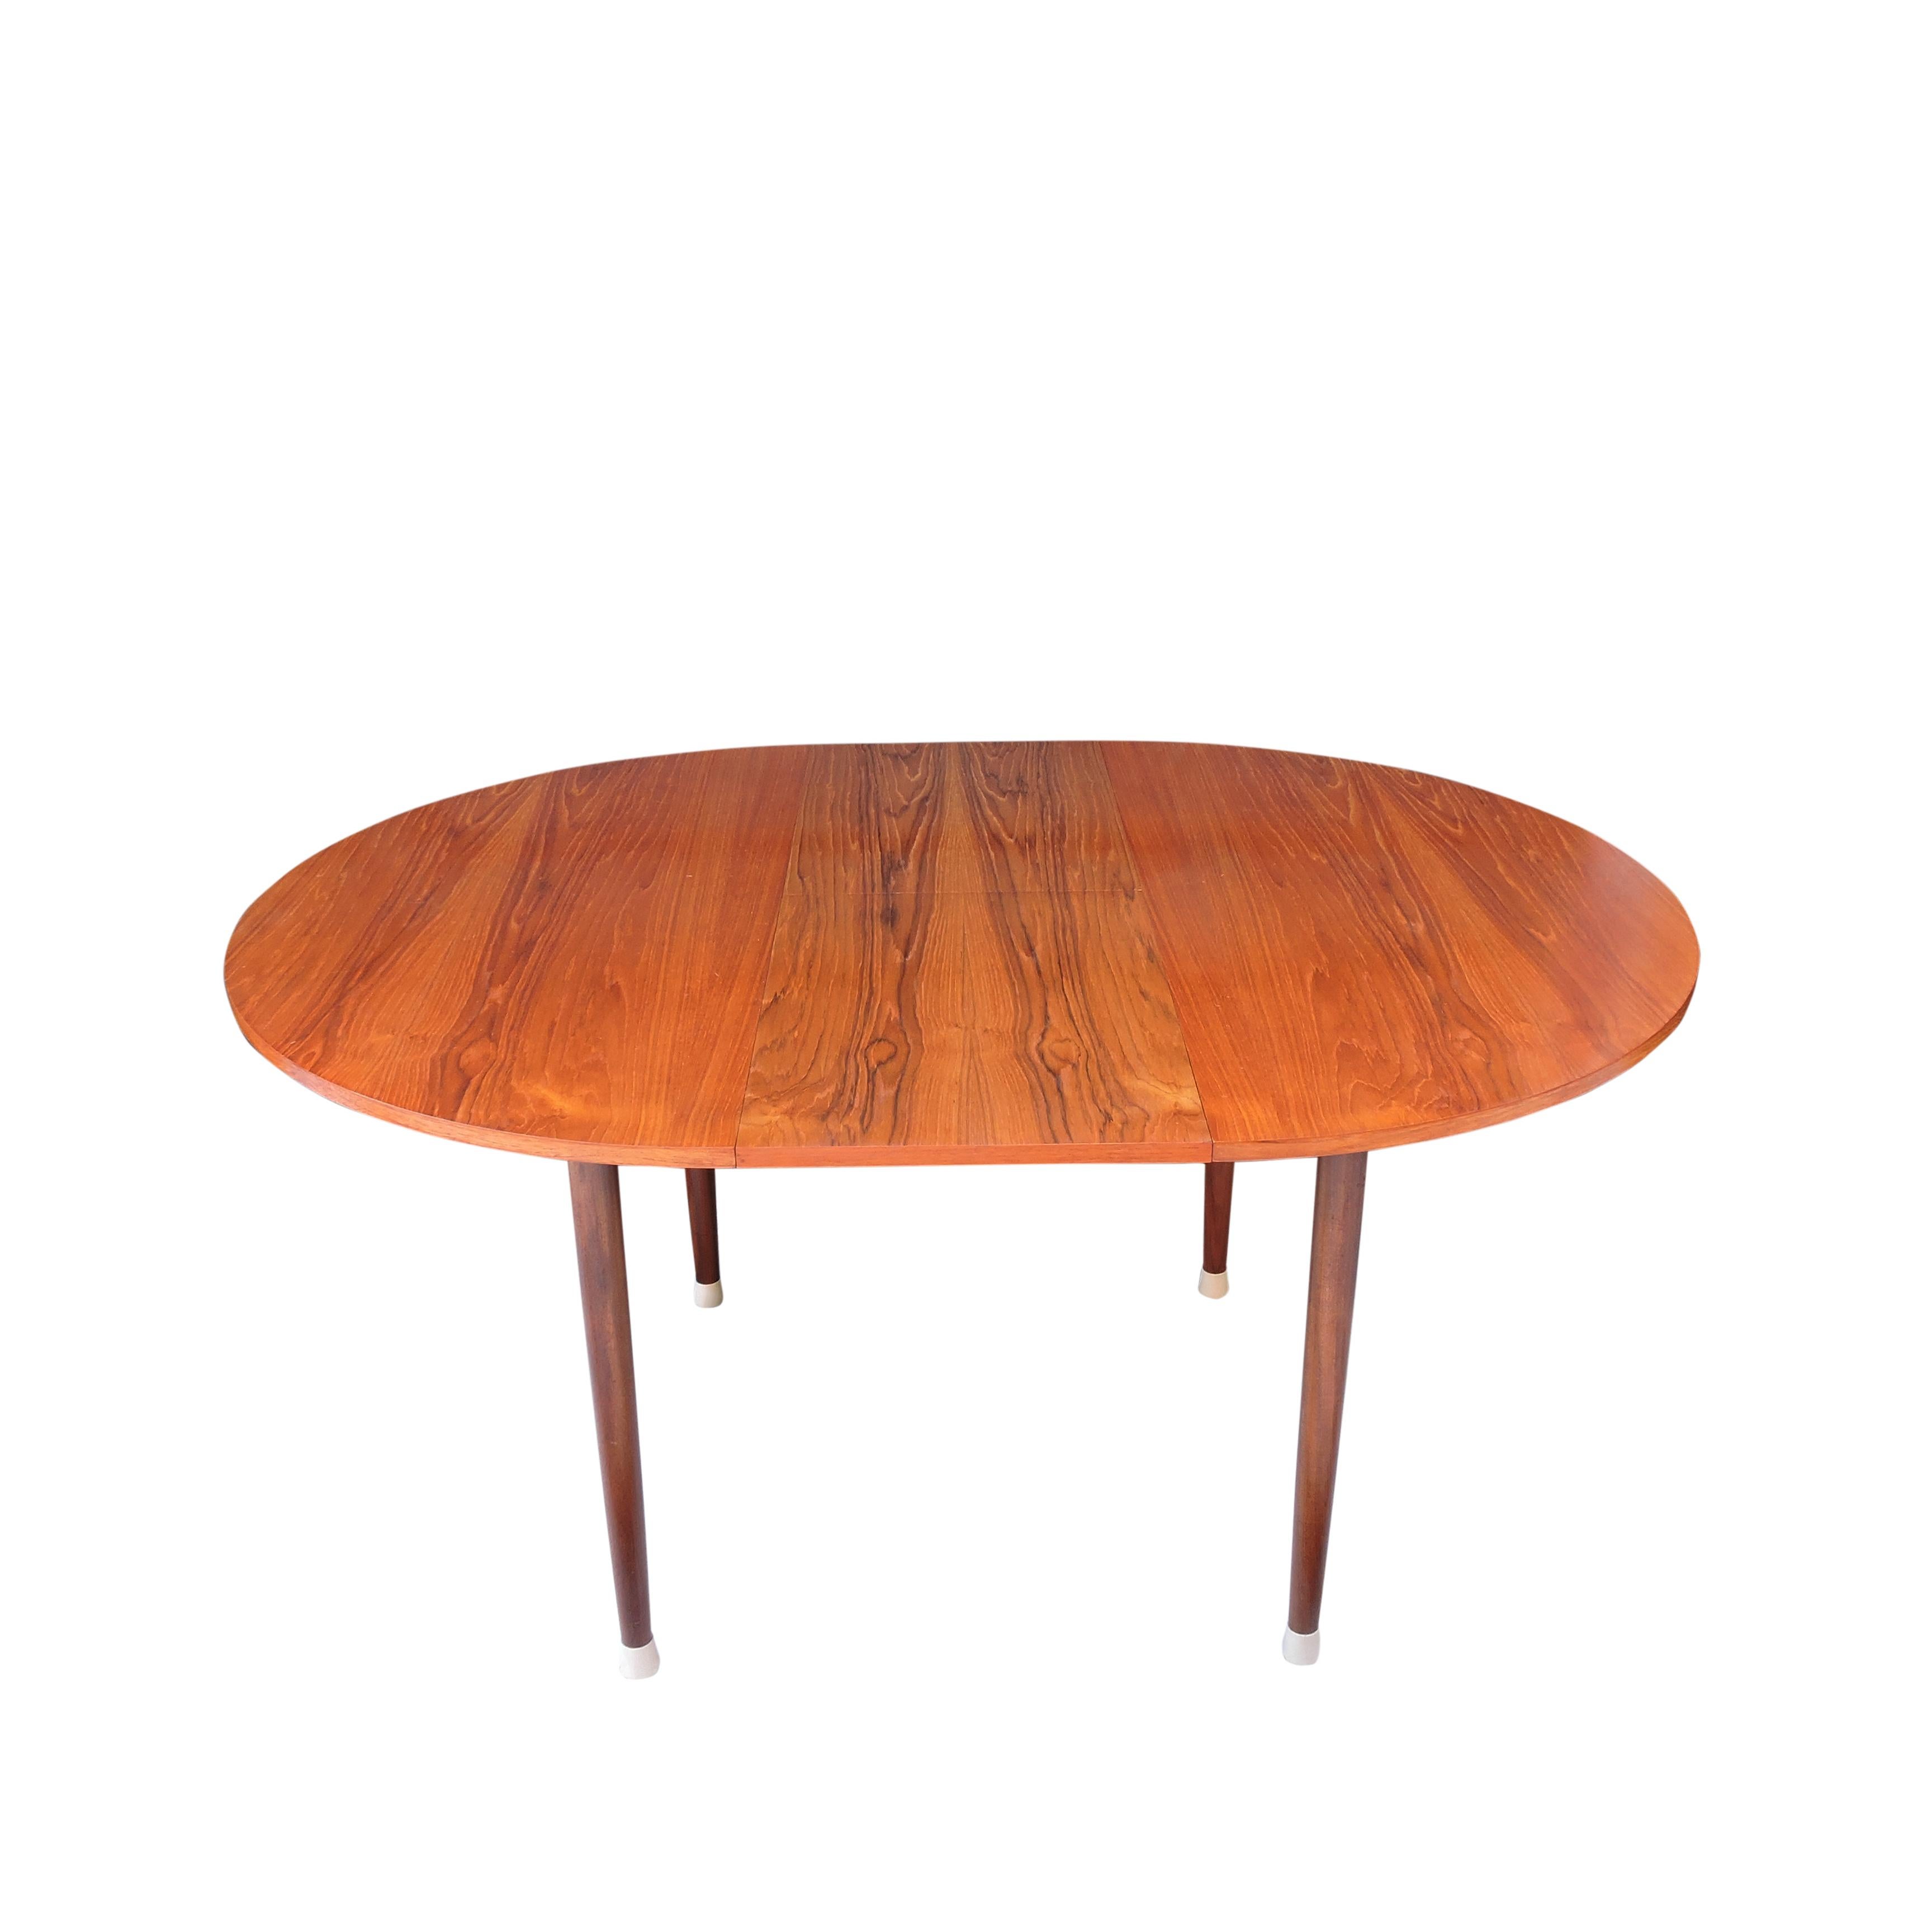 This 1960s extendable teak dining table features tapered legs on white rubber stoppers.